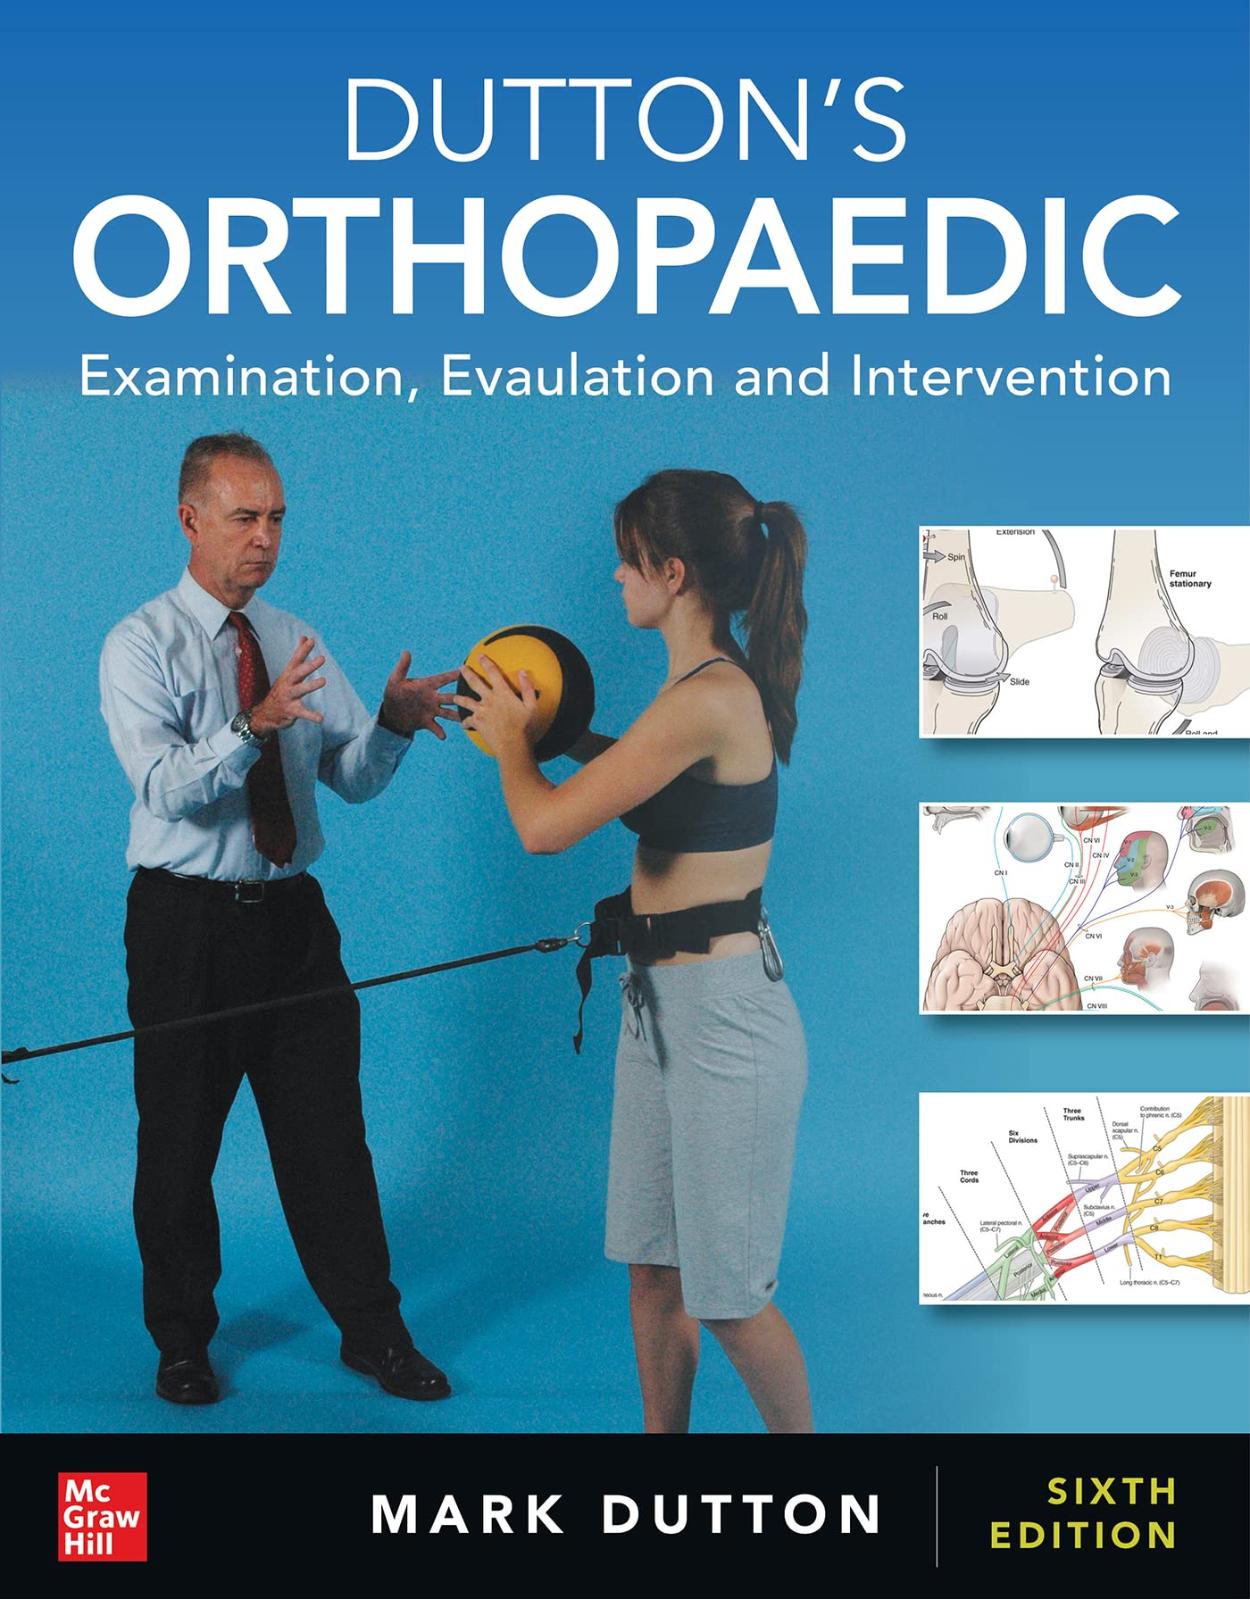 Dutton’s Orthopaedic: Examination, Evaluation and Intervention, Fifth Edition